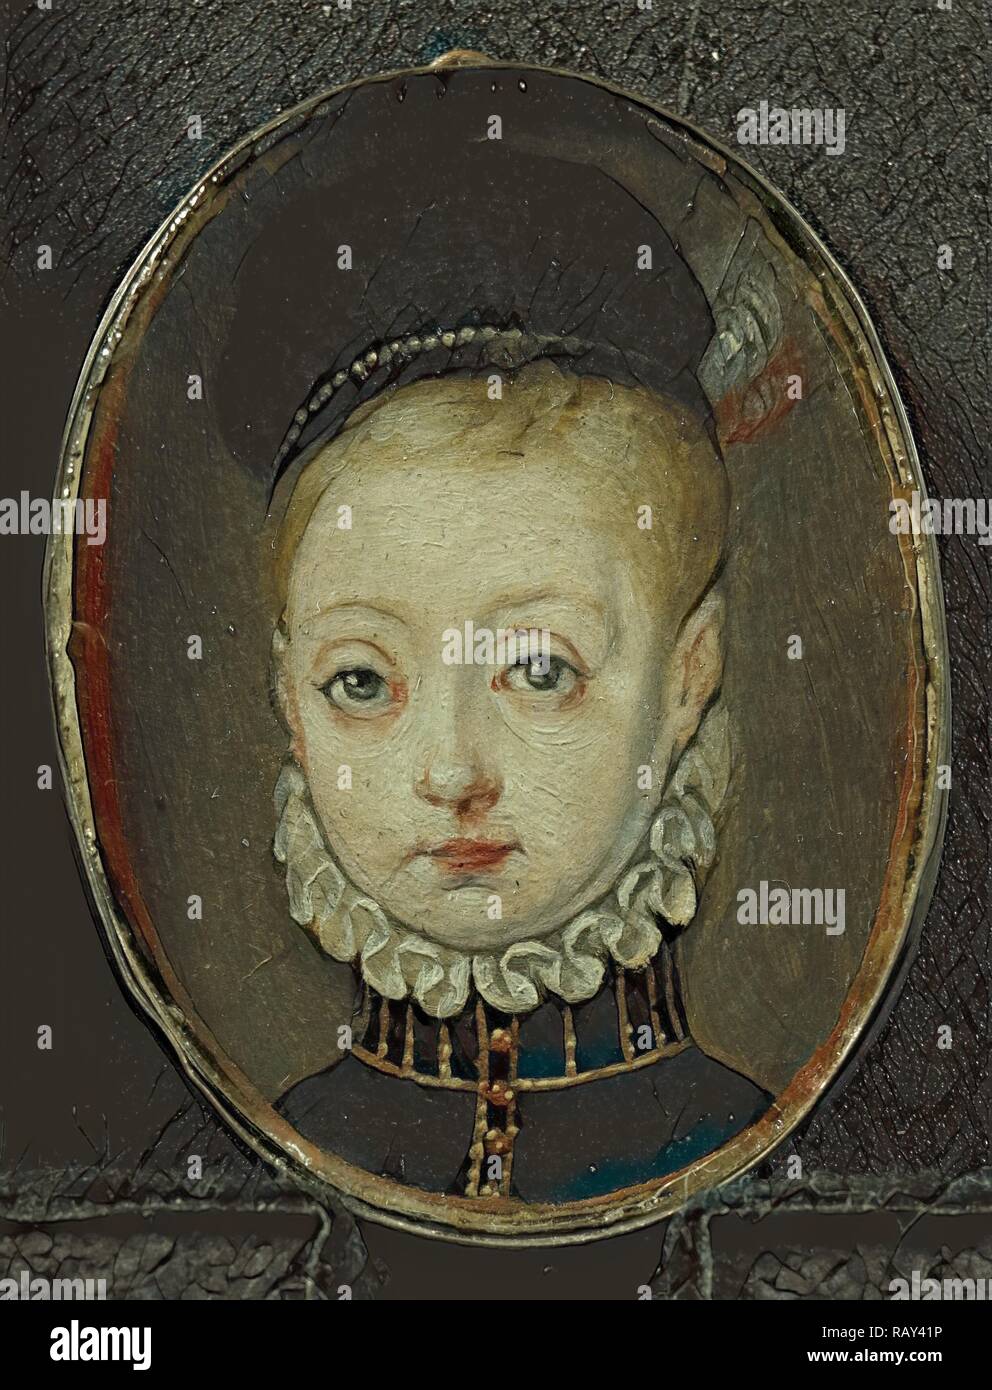 Jacobus I, 1556-1625, the future King of England, as a child, attributed to Arnold van Bronckorst, 1574 - 1598 reimagined Stock Photo